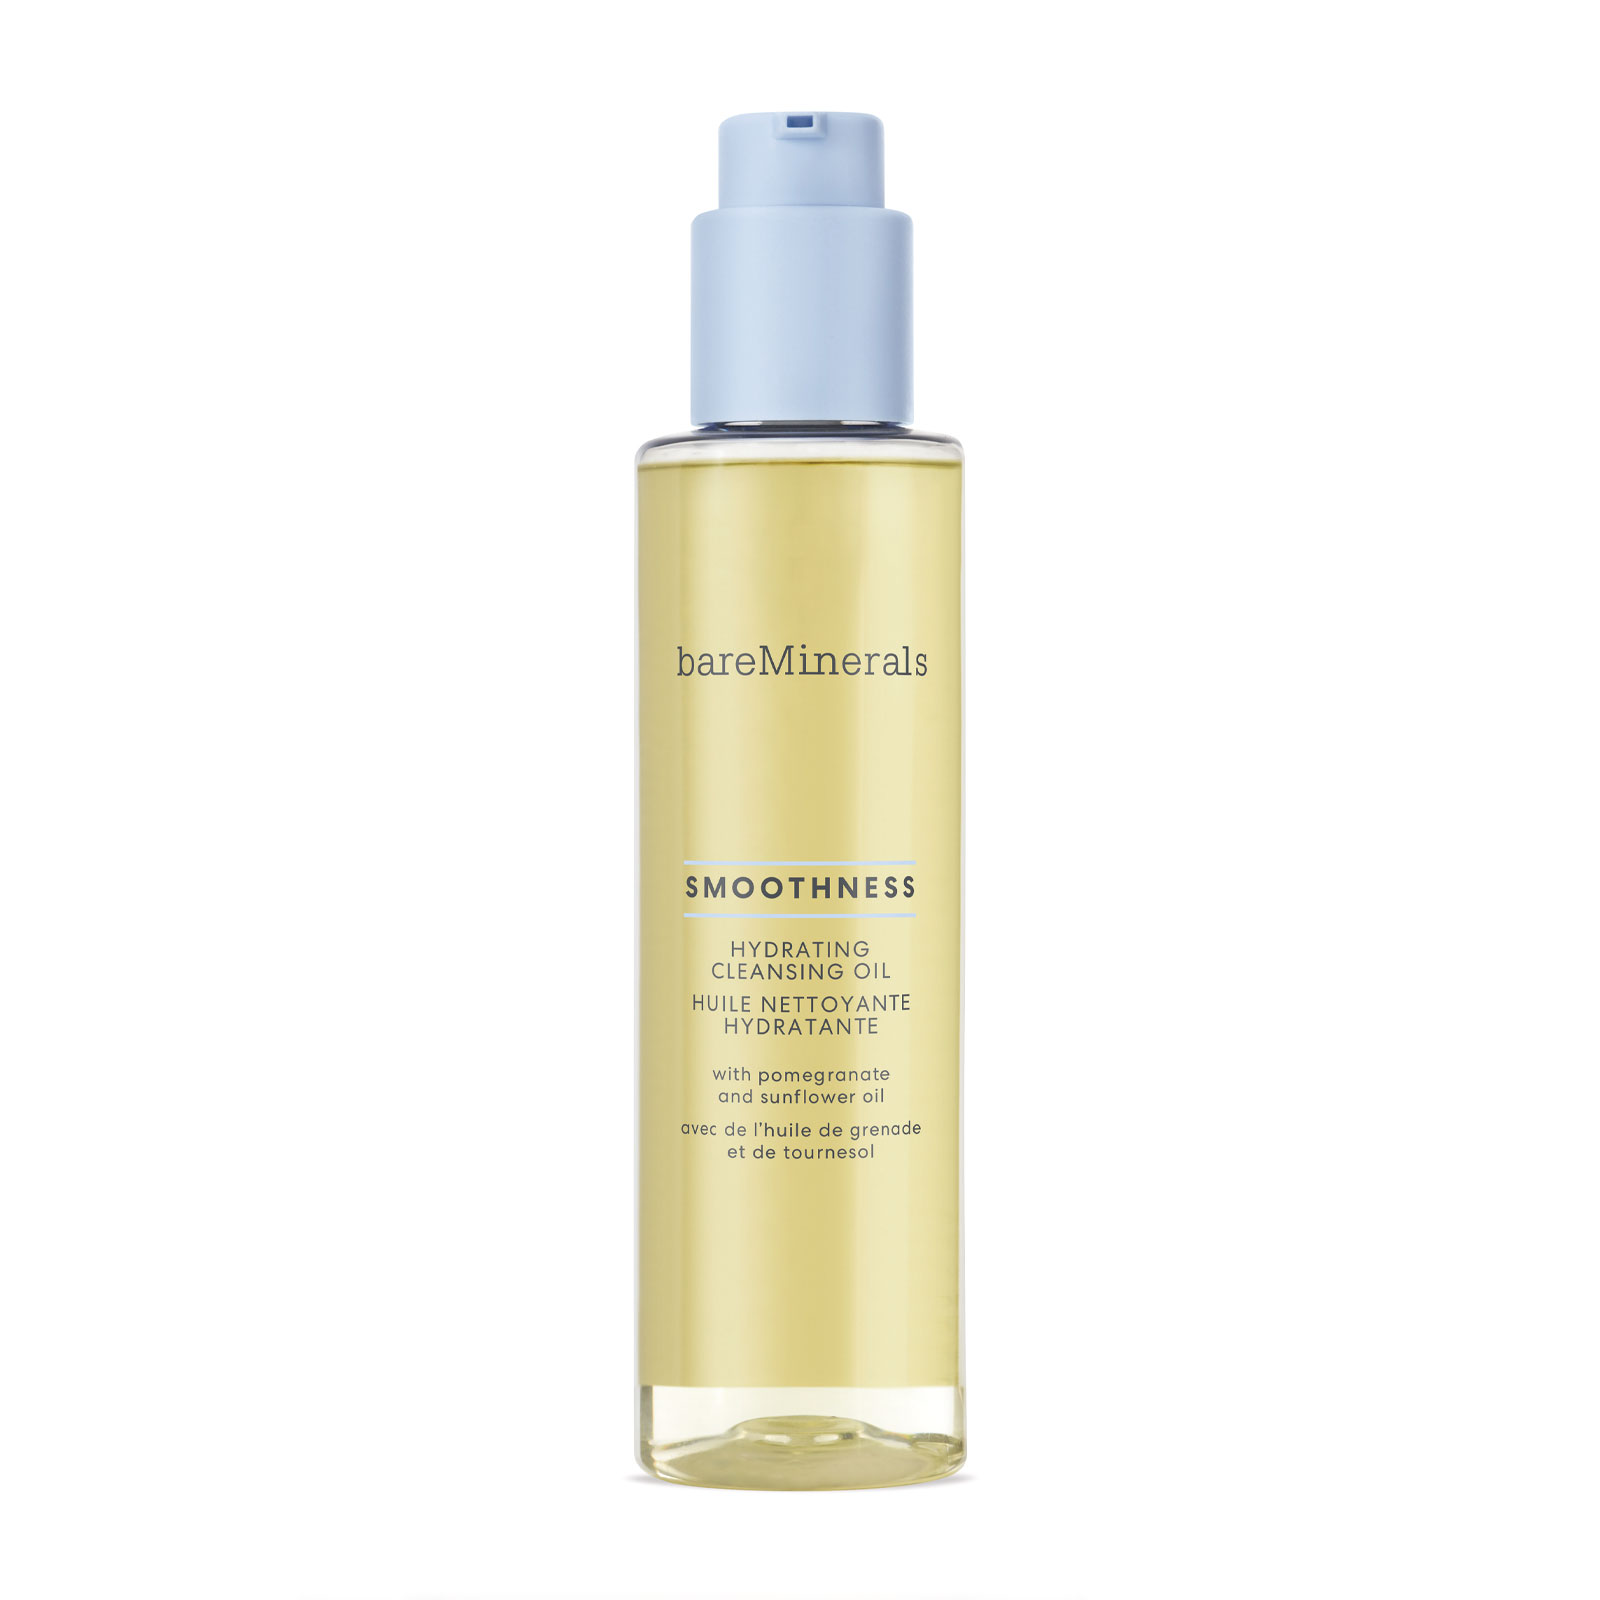 bareMinerals Smoothness Hydrating Cleansing Oil�180ml